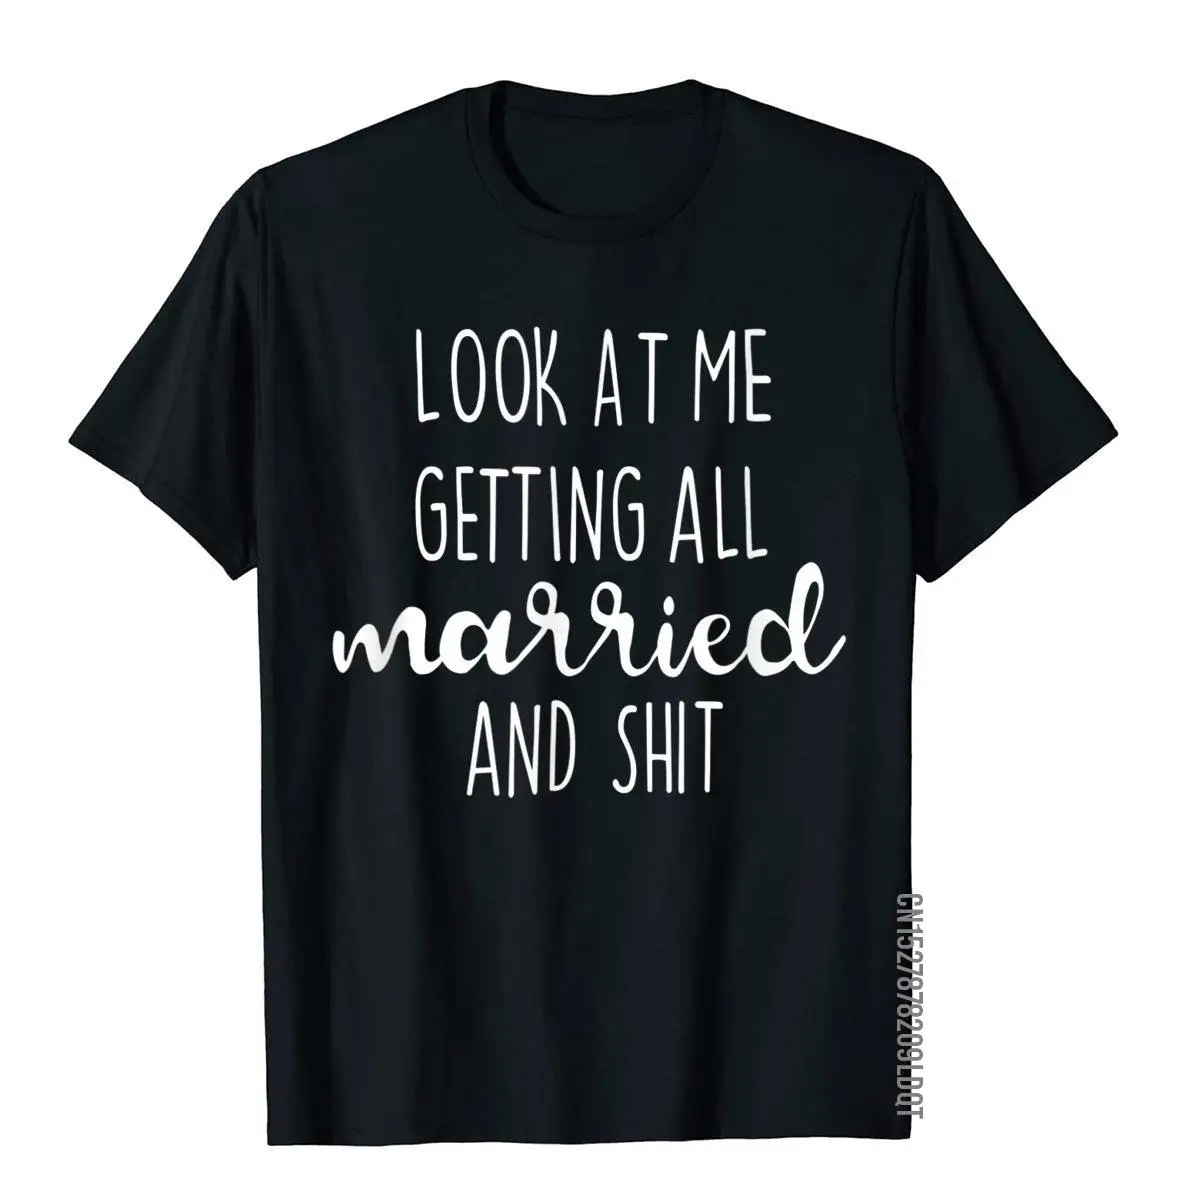 

Look At Me Getting All Married And Shit TShirt Shirt Fashion Men Top T-Shirts Street Tops Tees Cotton 3D Style